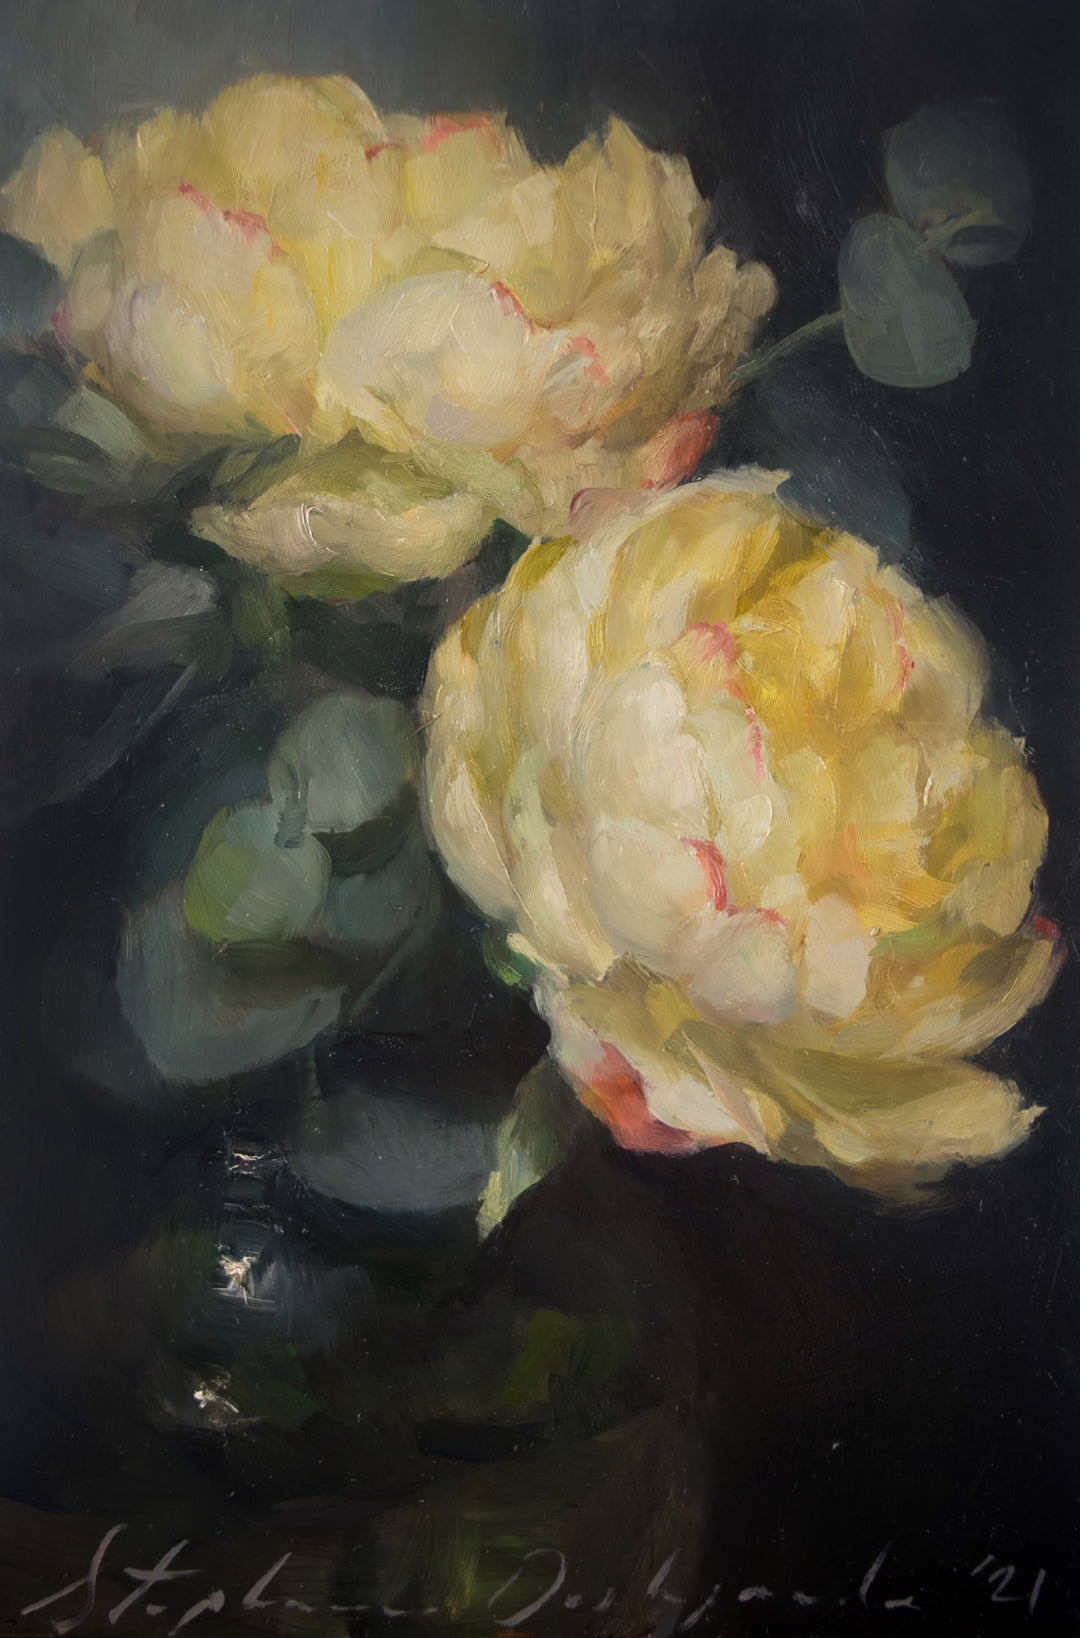 A painting of "Yellow Peonies" in a vase, rendered in oil on panel by Stephanie Deshpande.